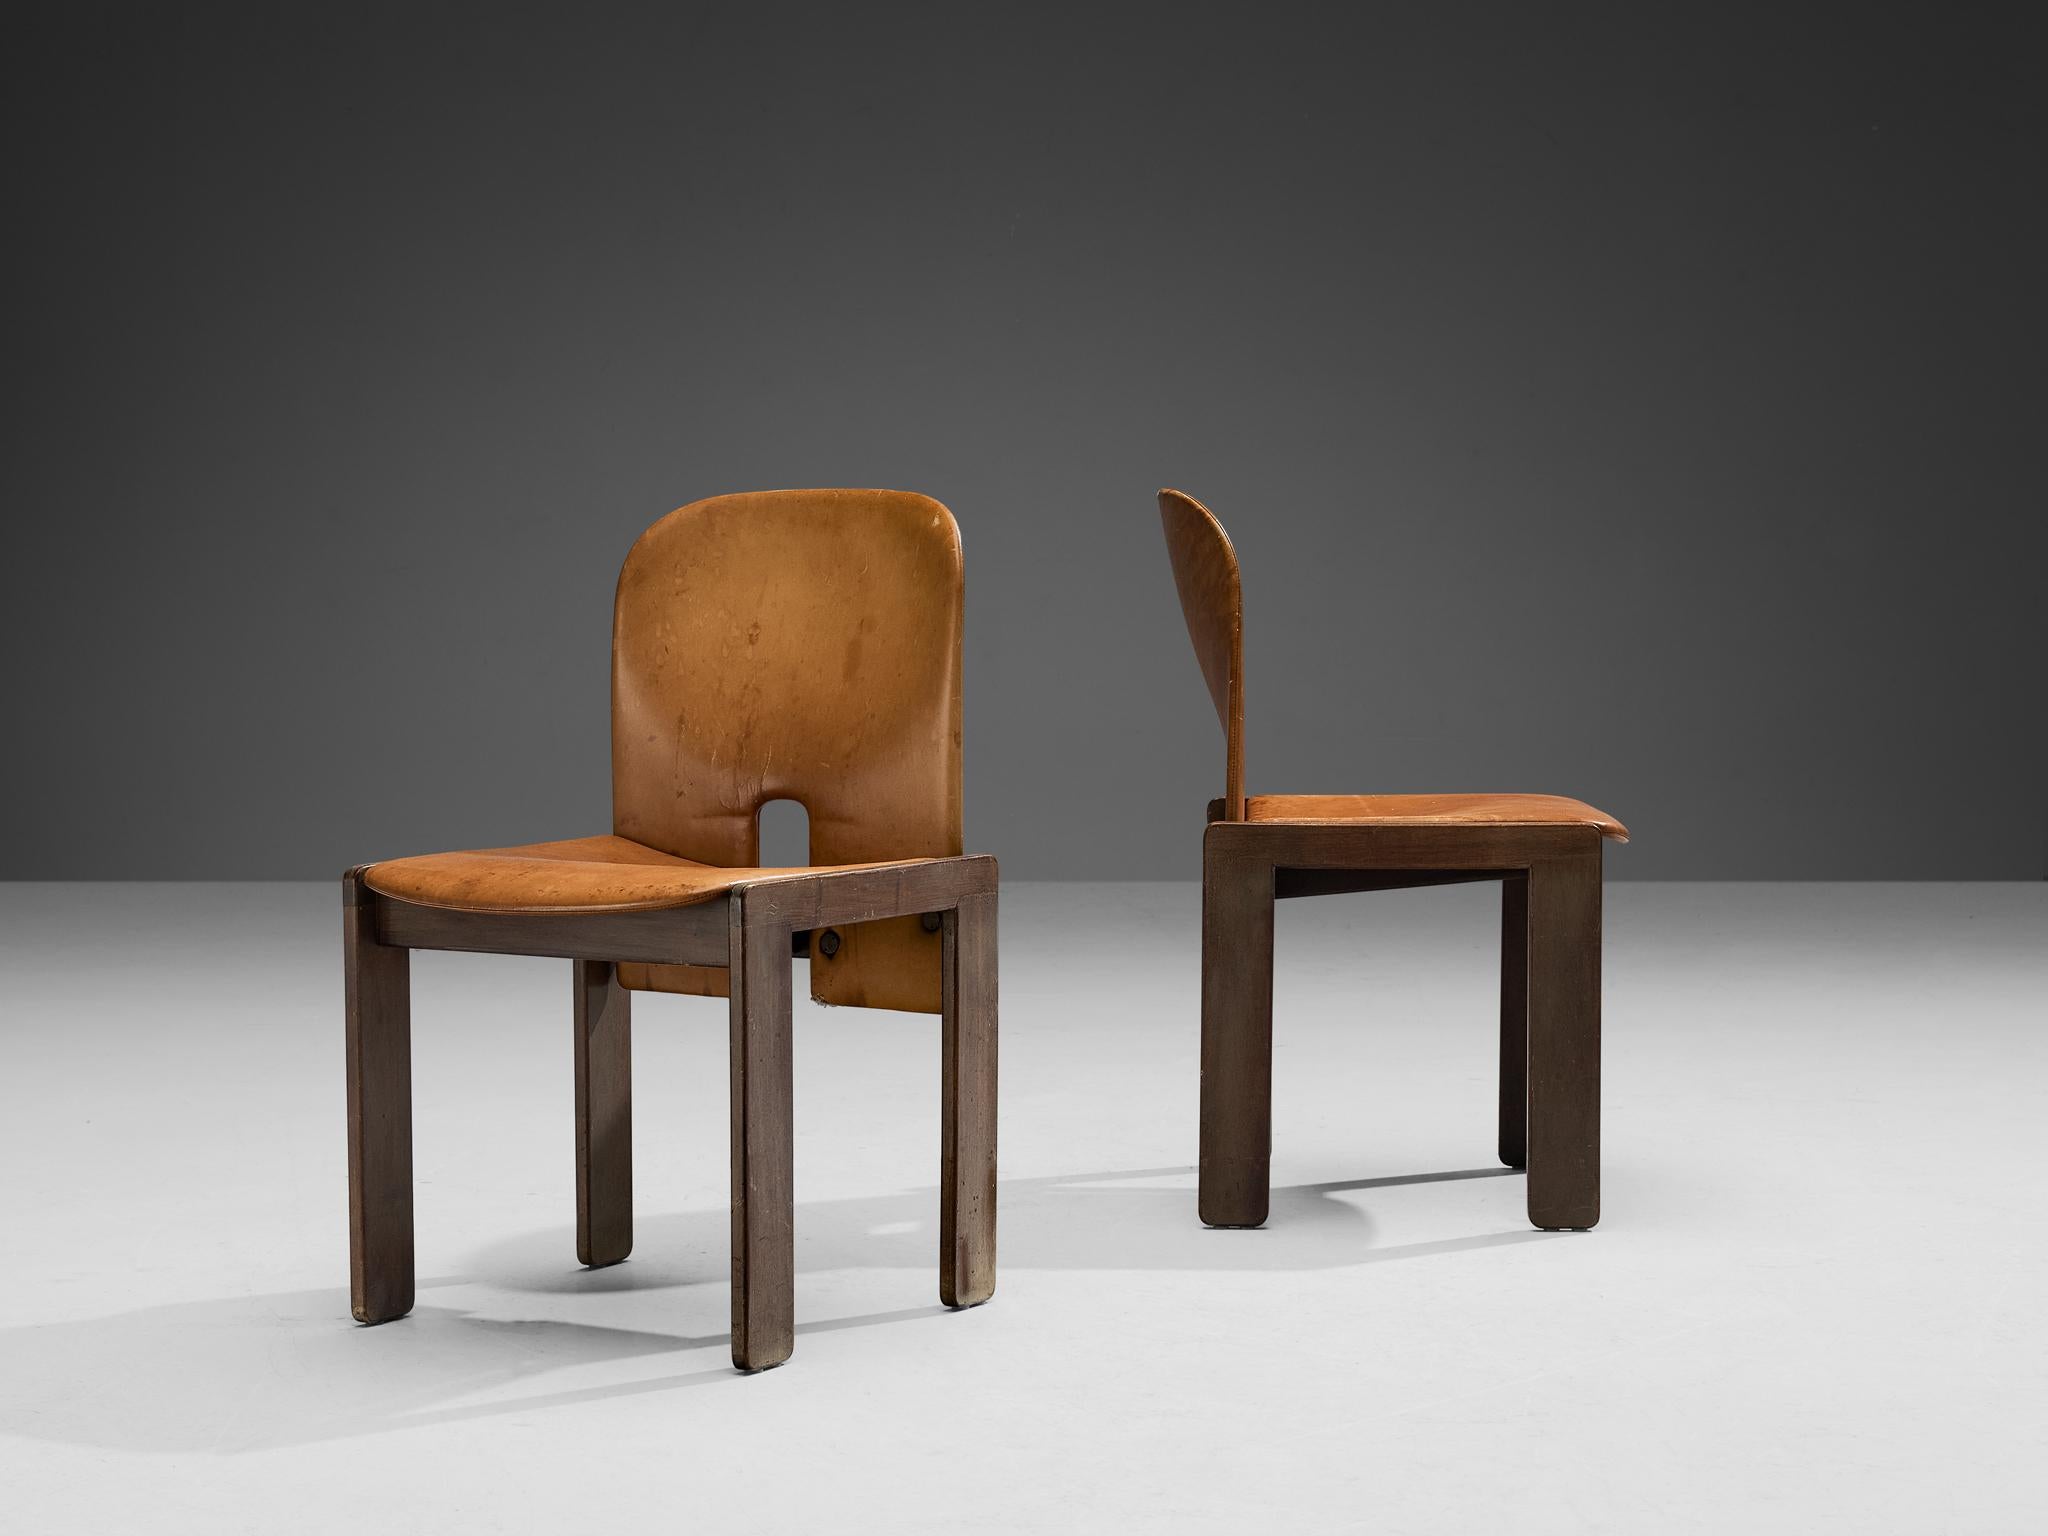 Afra & Tobia Scarpa for Cassina, pair of dining chairs model '121', walnut, leather, Italy, design 1965

Pair of chairs by the Italian designer couple Tobia & Afra Scarpa. These chairs have a cubic and architectural appearance. The base consists